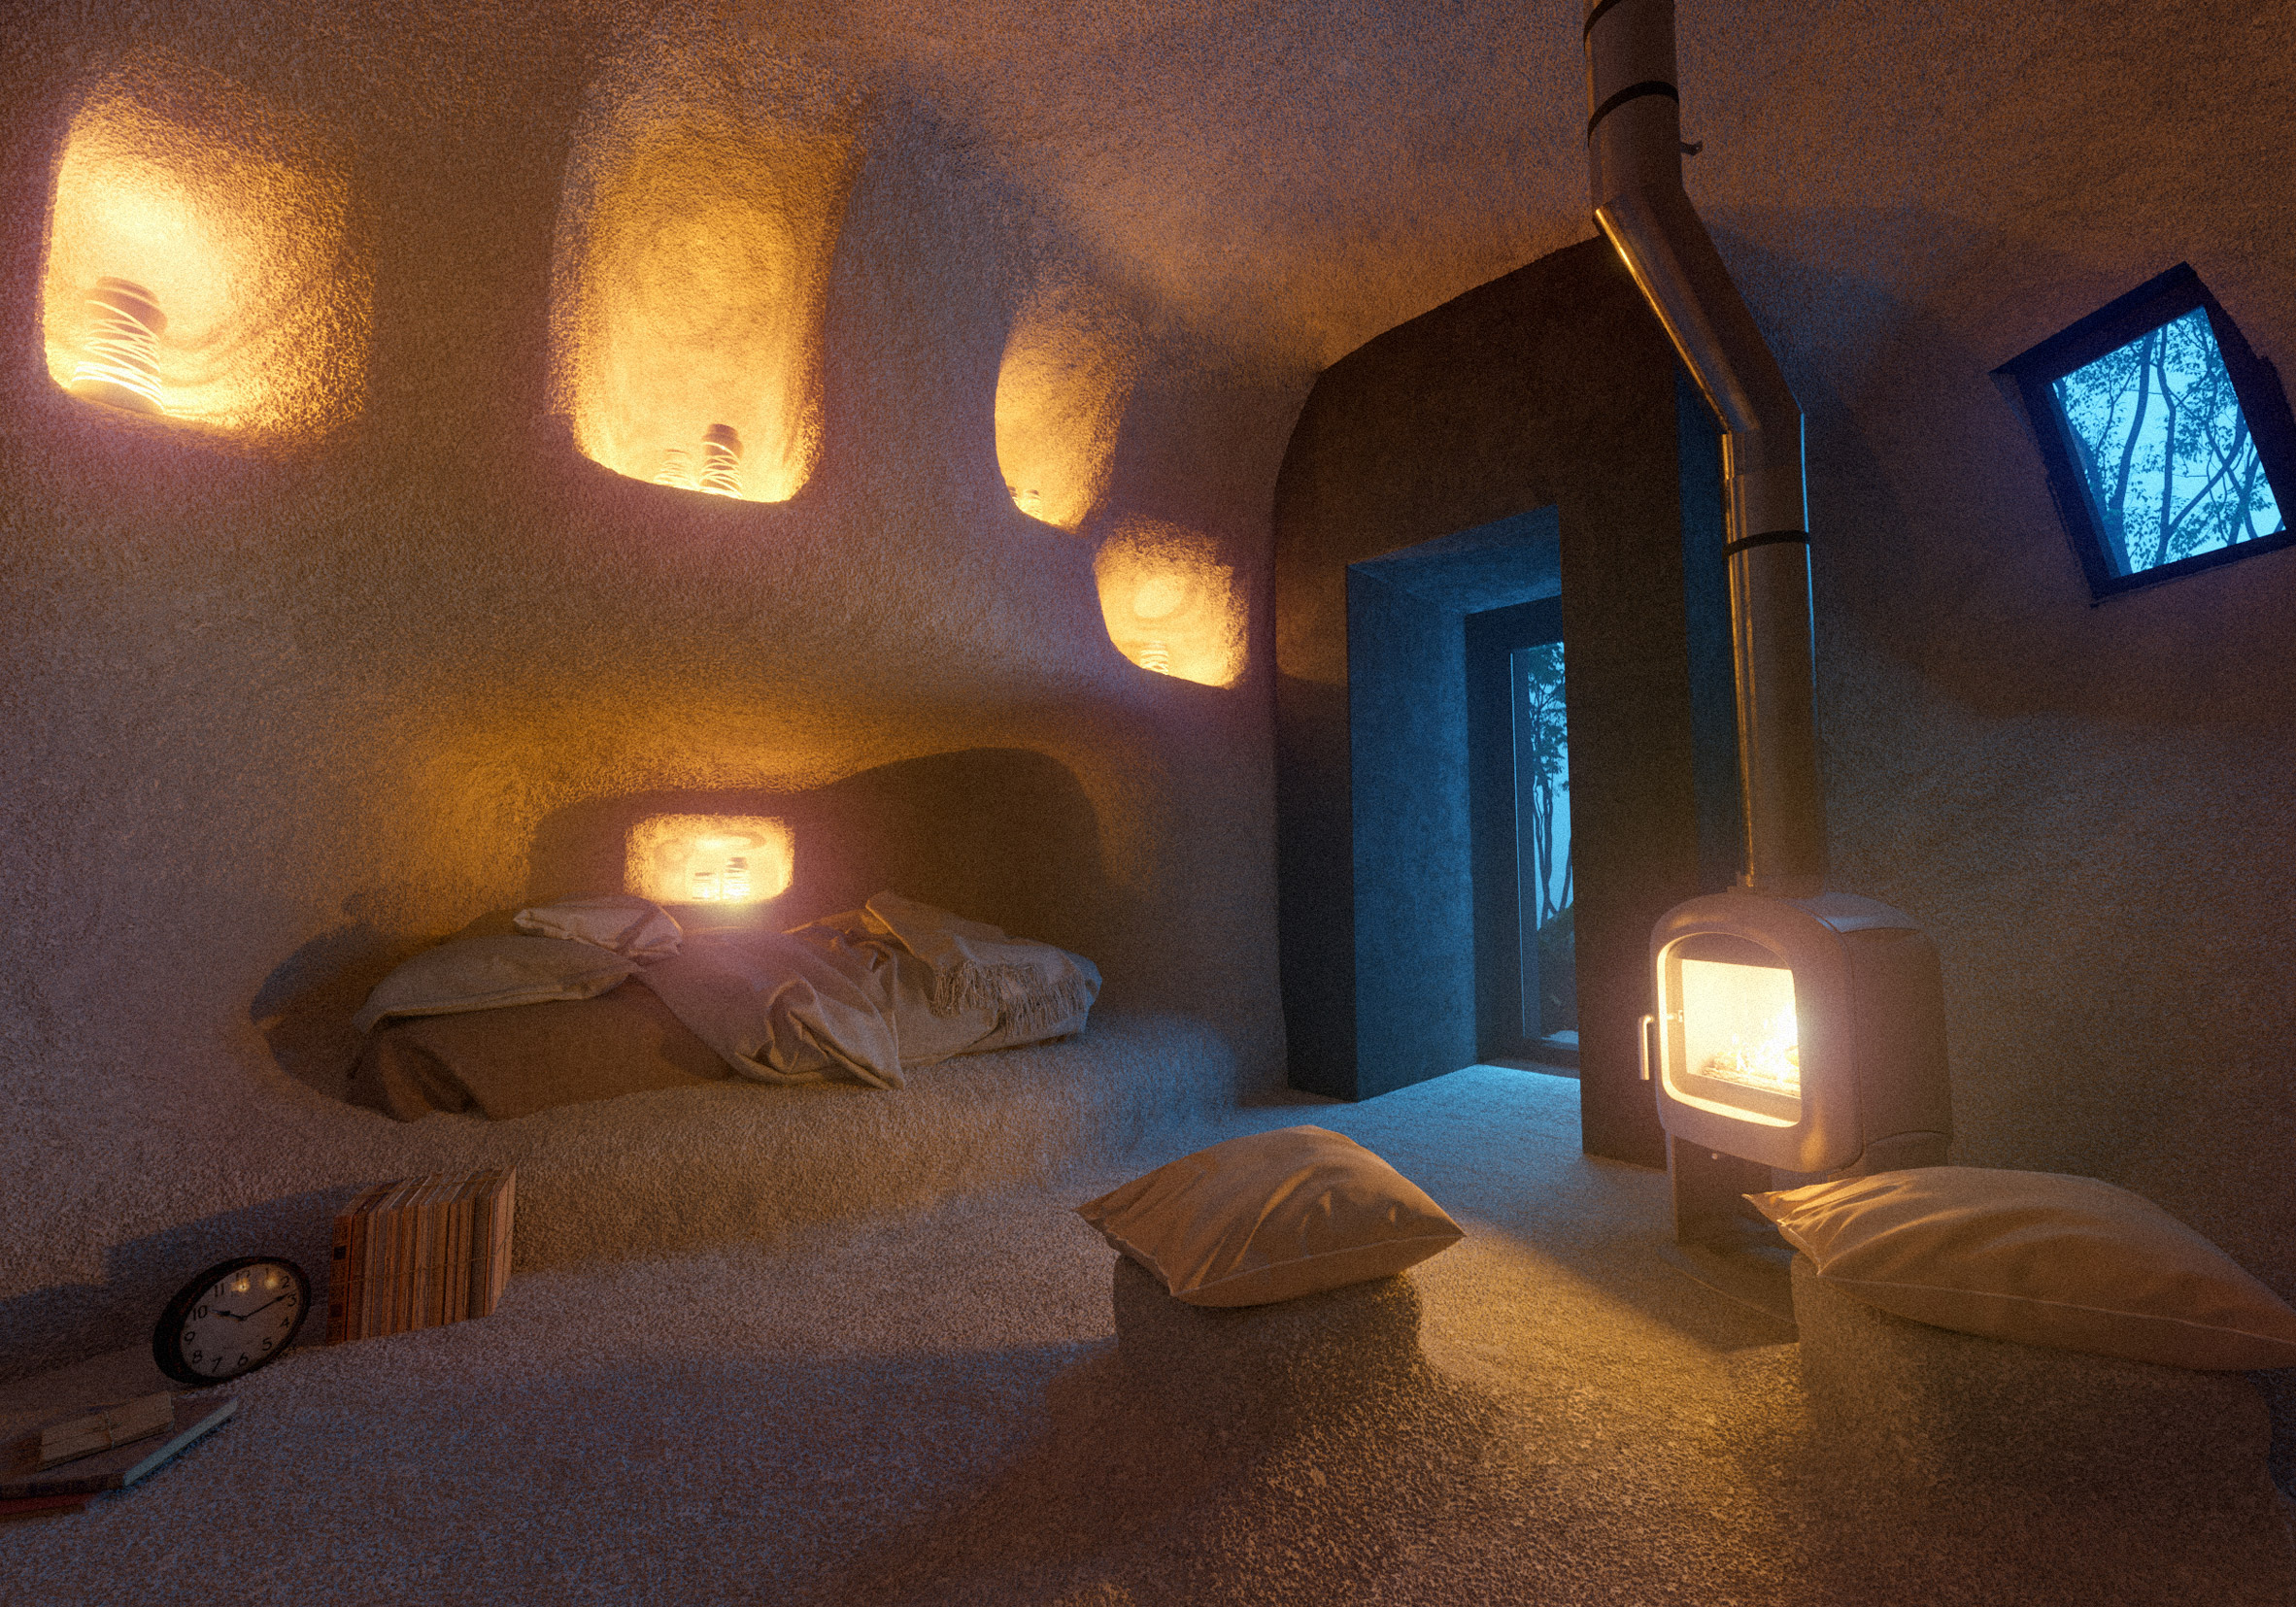 Interior renderings of Dolmen Shelter, a fictional hotel with stone-shaped rooms